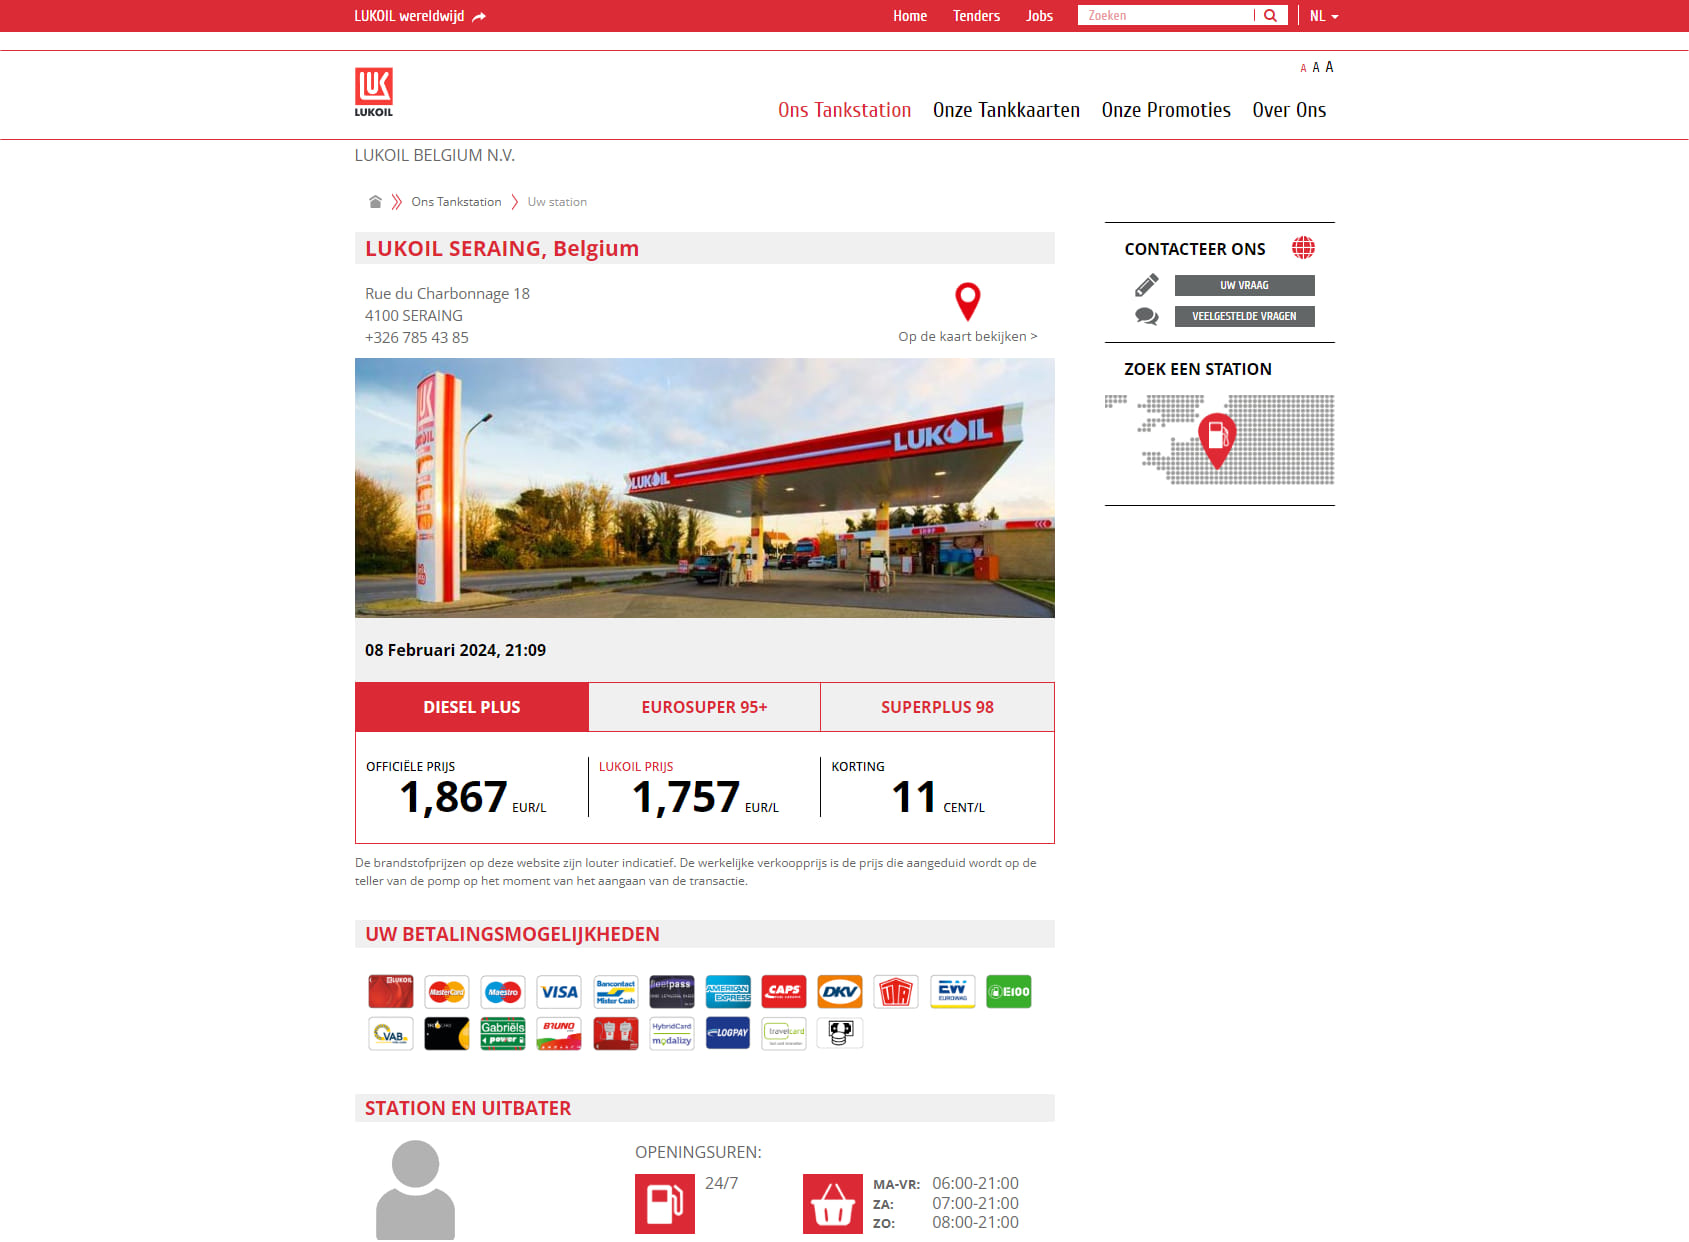 LUKOIL Seraing Charbonnage CARREFOUR DELIWAY